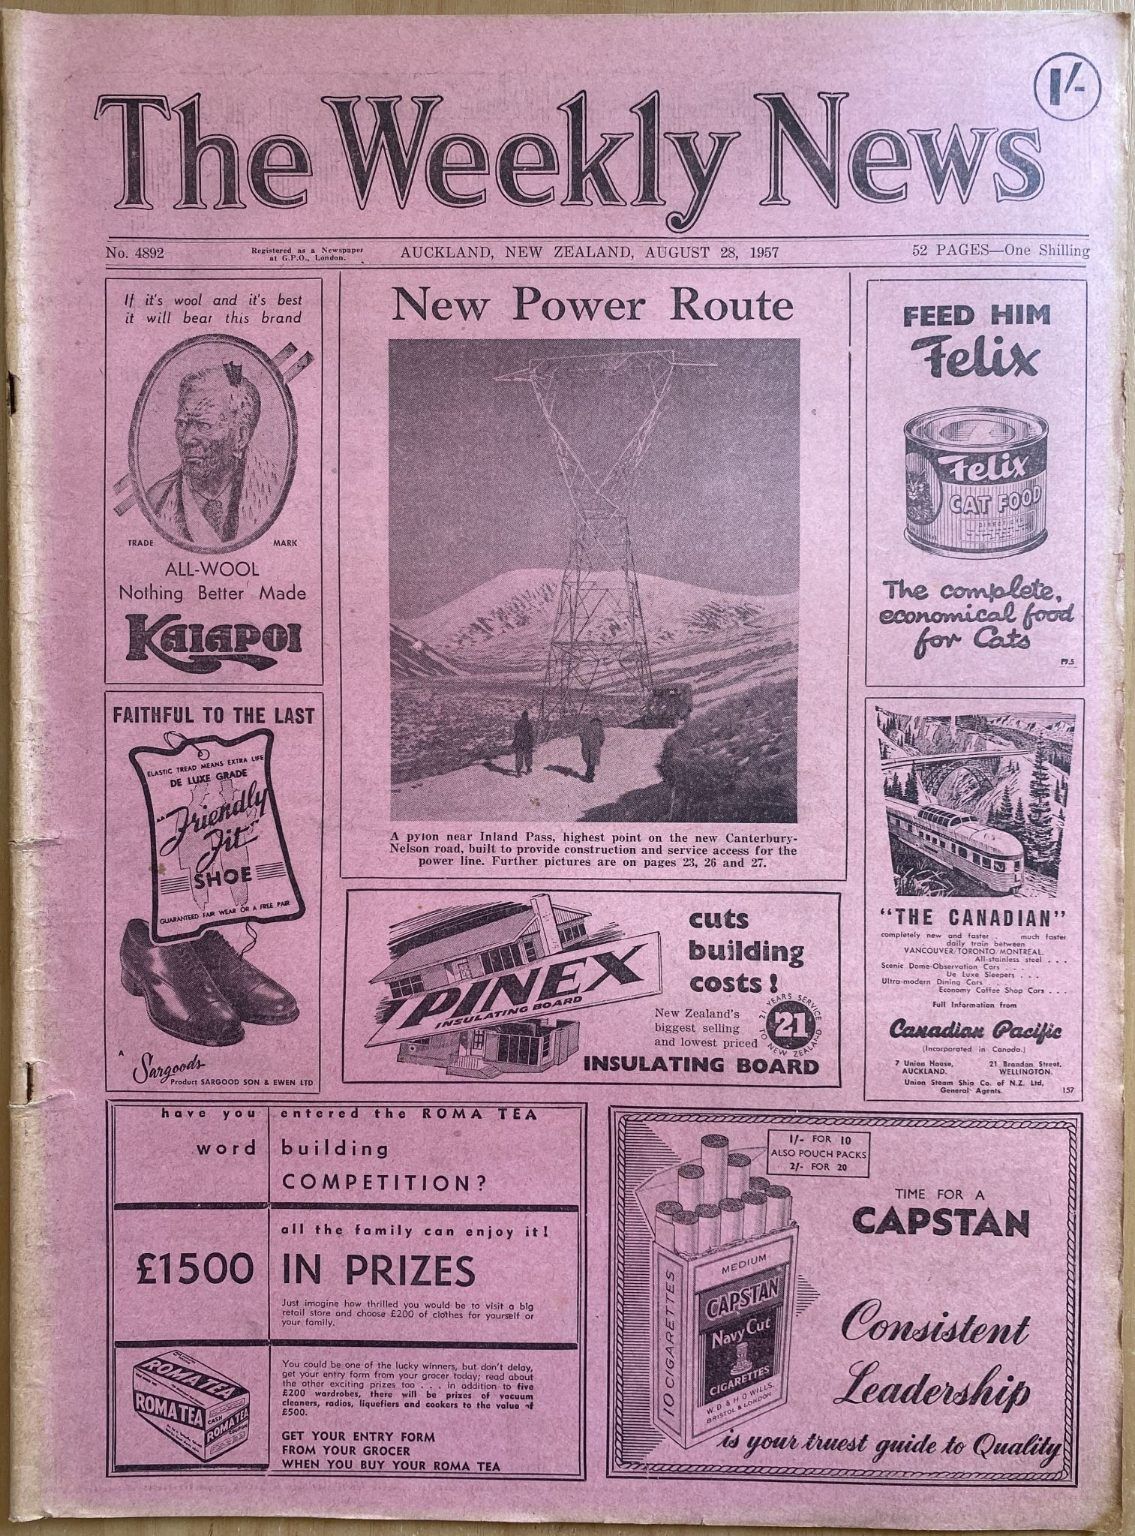 OLD NEWSPAPER: The Weekly News, No. 4892, 28 August 1957